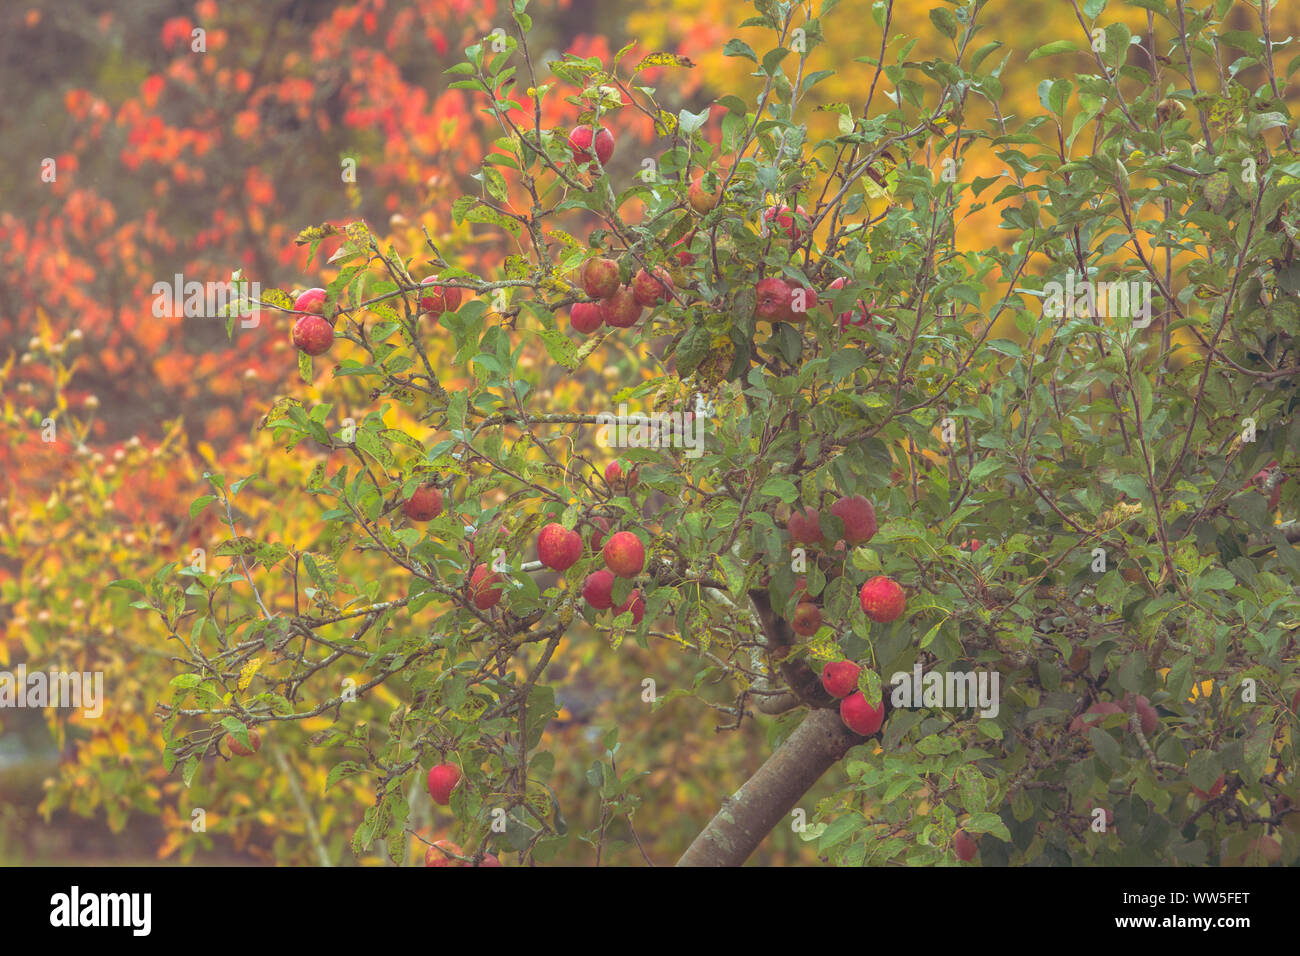 Red apples on a tree in bright autumn colours, Stock Photo